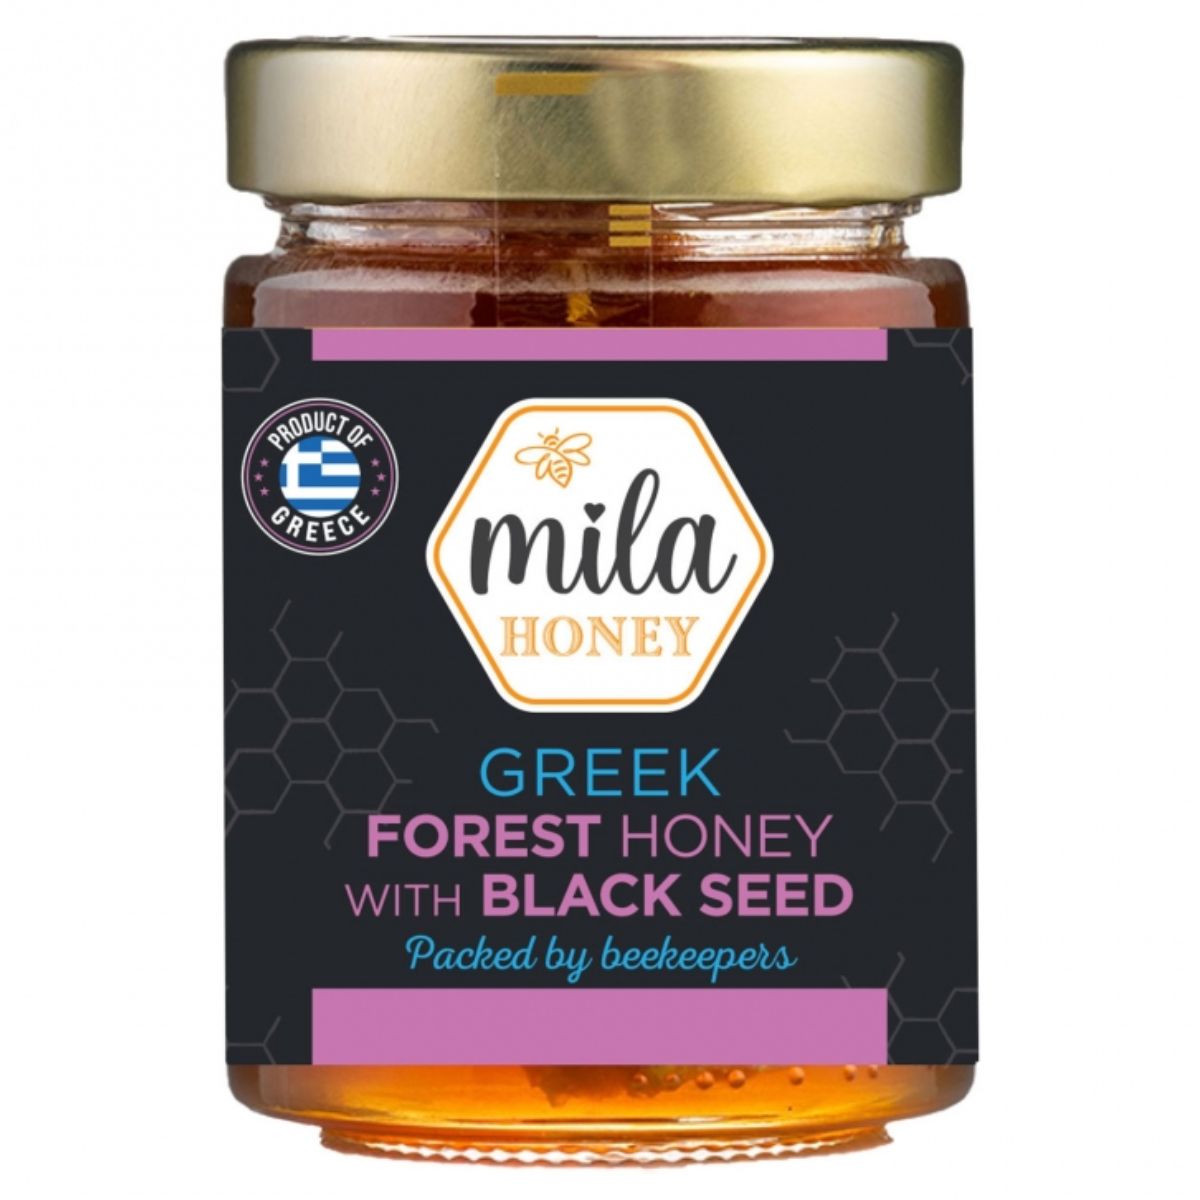 A jar of Mila - Greek Forest Honey with Black Seed - 450g, packed by beekeepers.